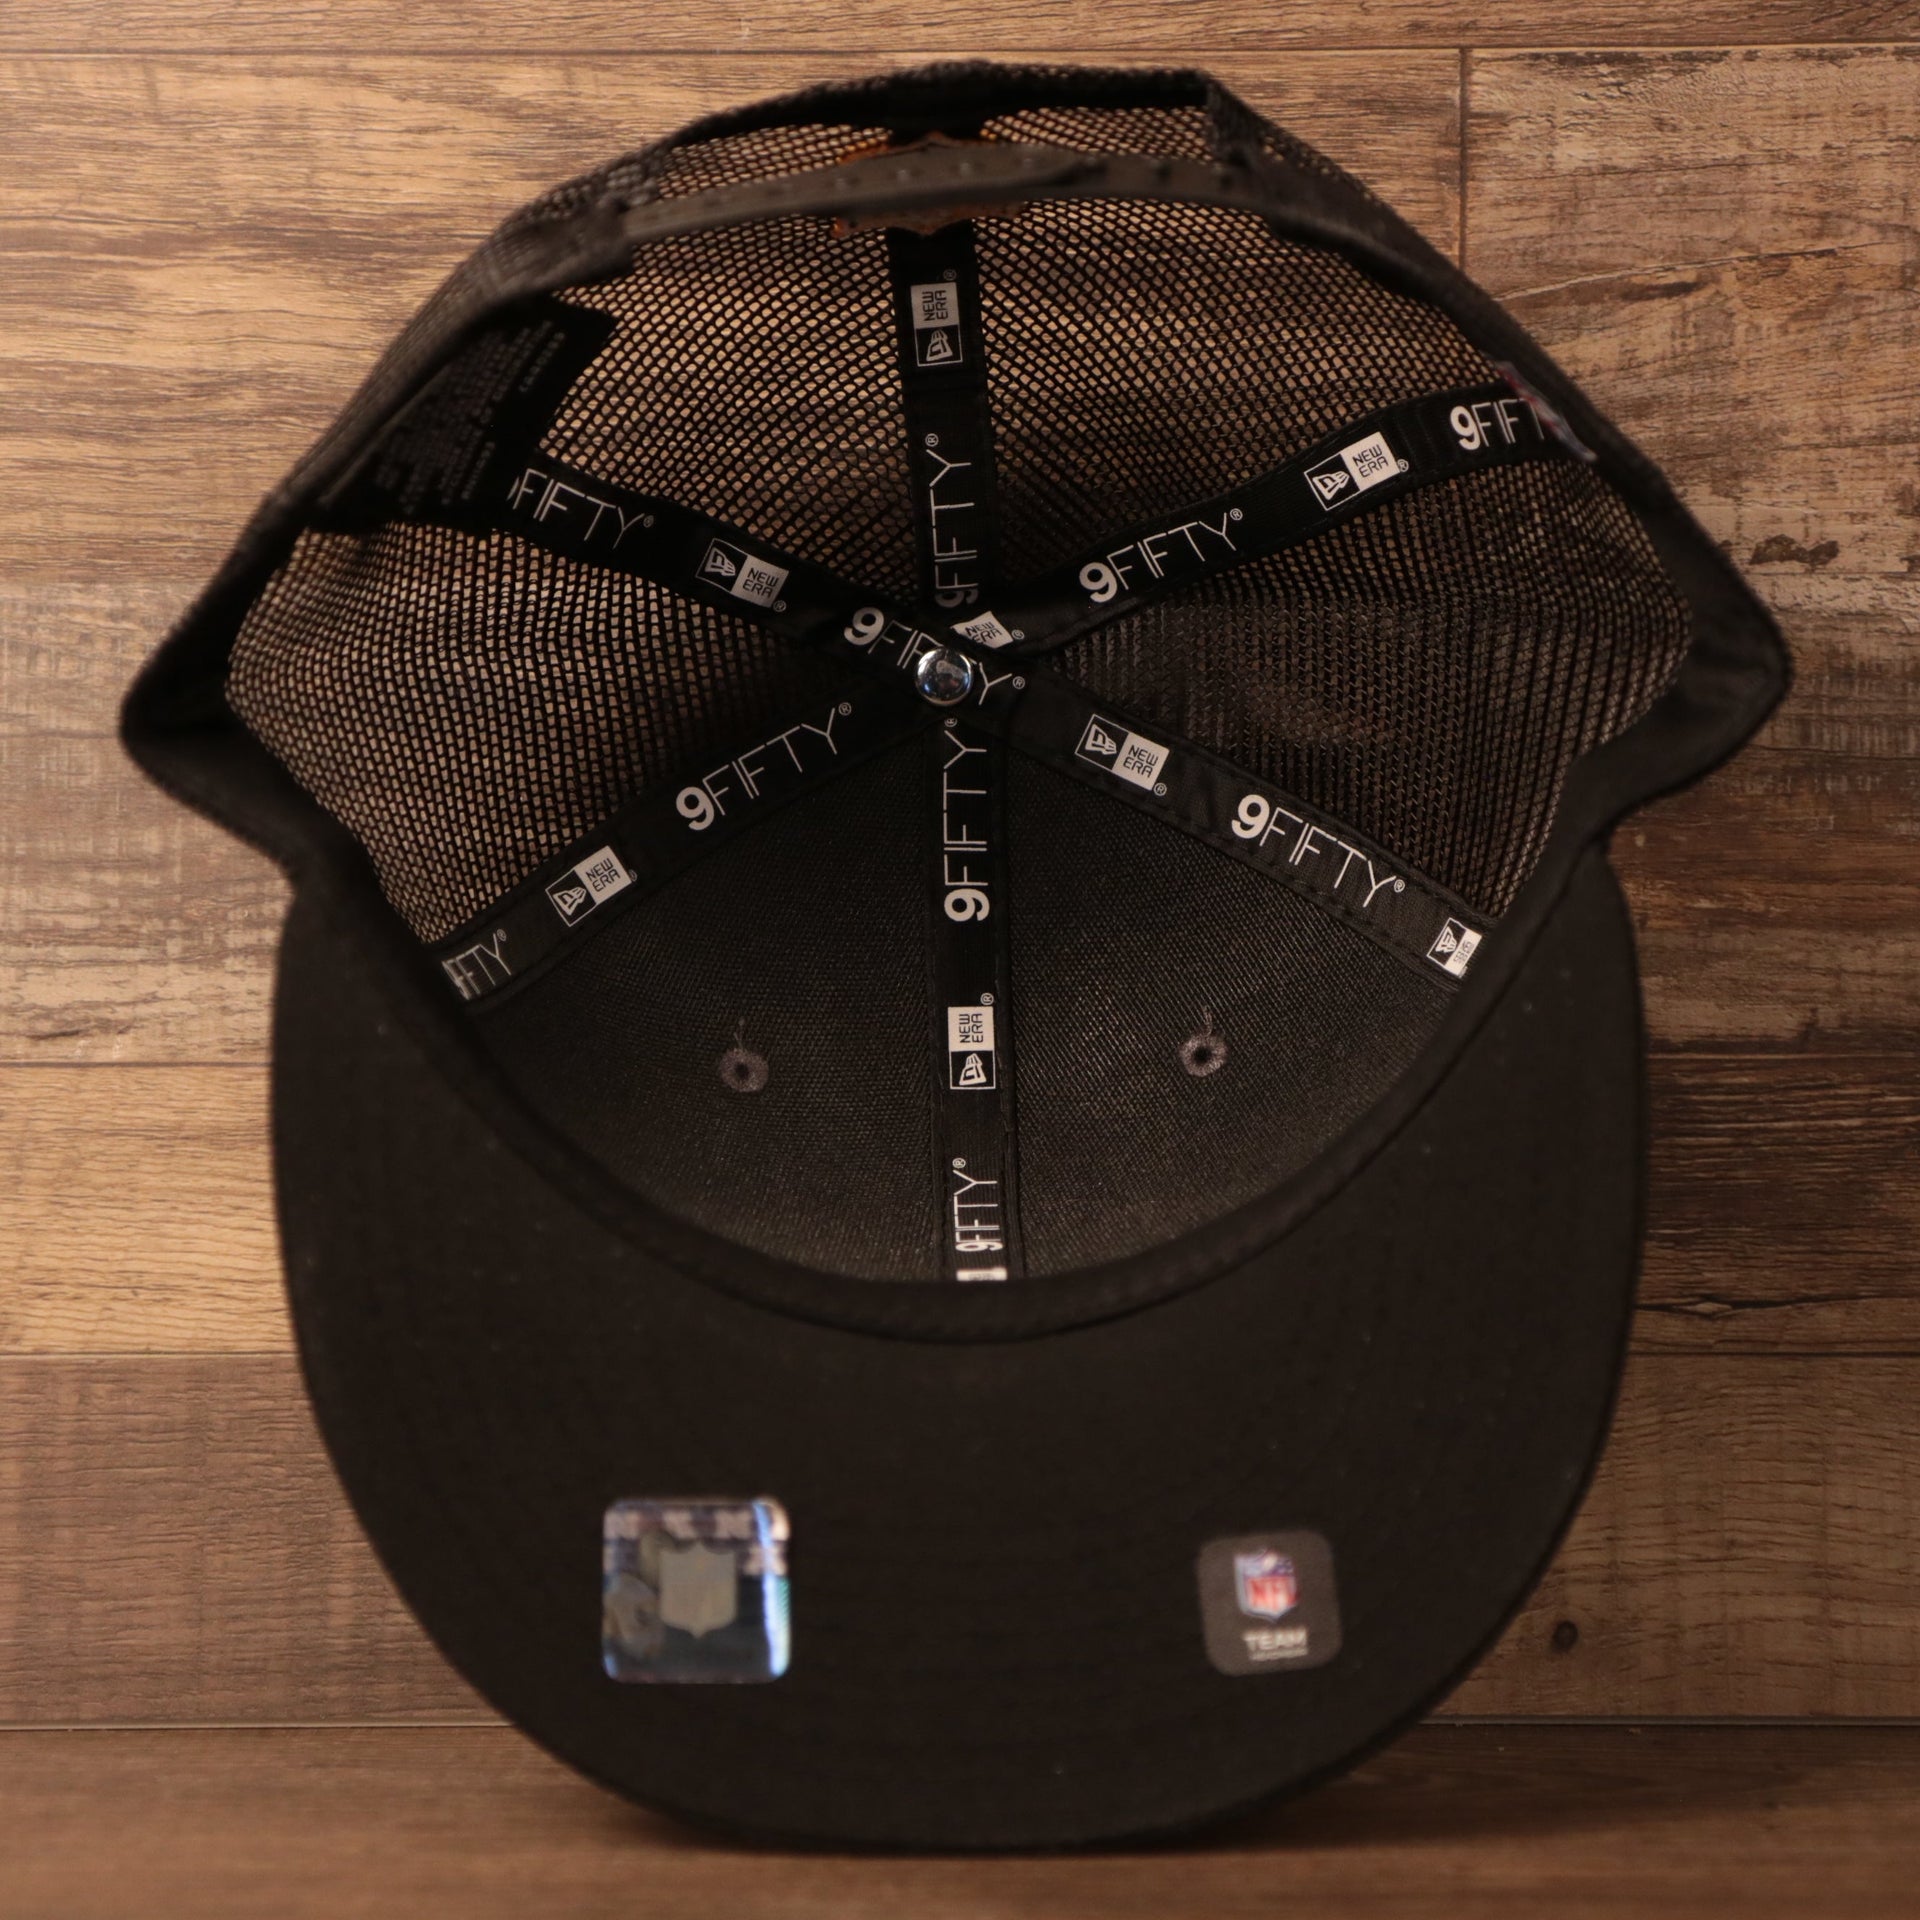 The inside of the crown of the gray/black Pittsburgh Steelers New Era 2021 NFL draft trucker hat.